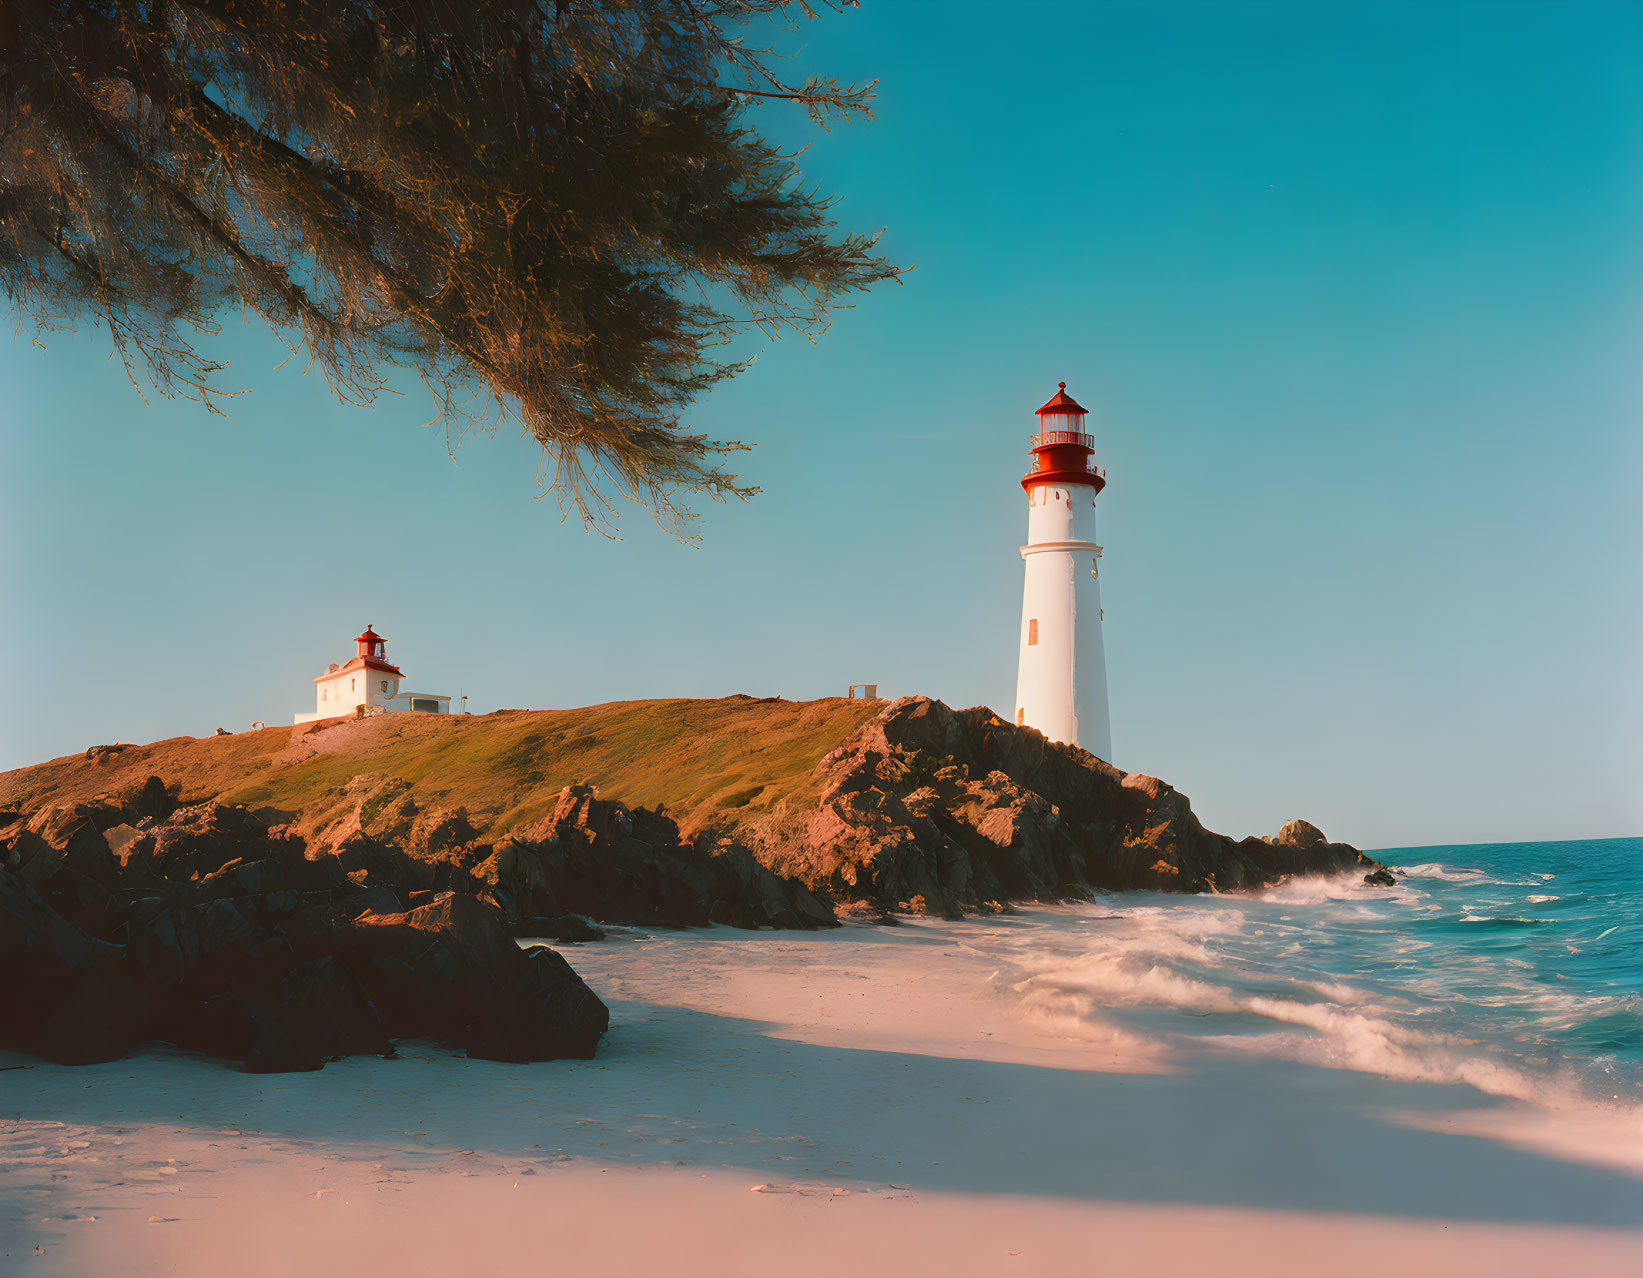 Scenic coastal view: white lighthouse on rocky outcrop by tranquil beach